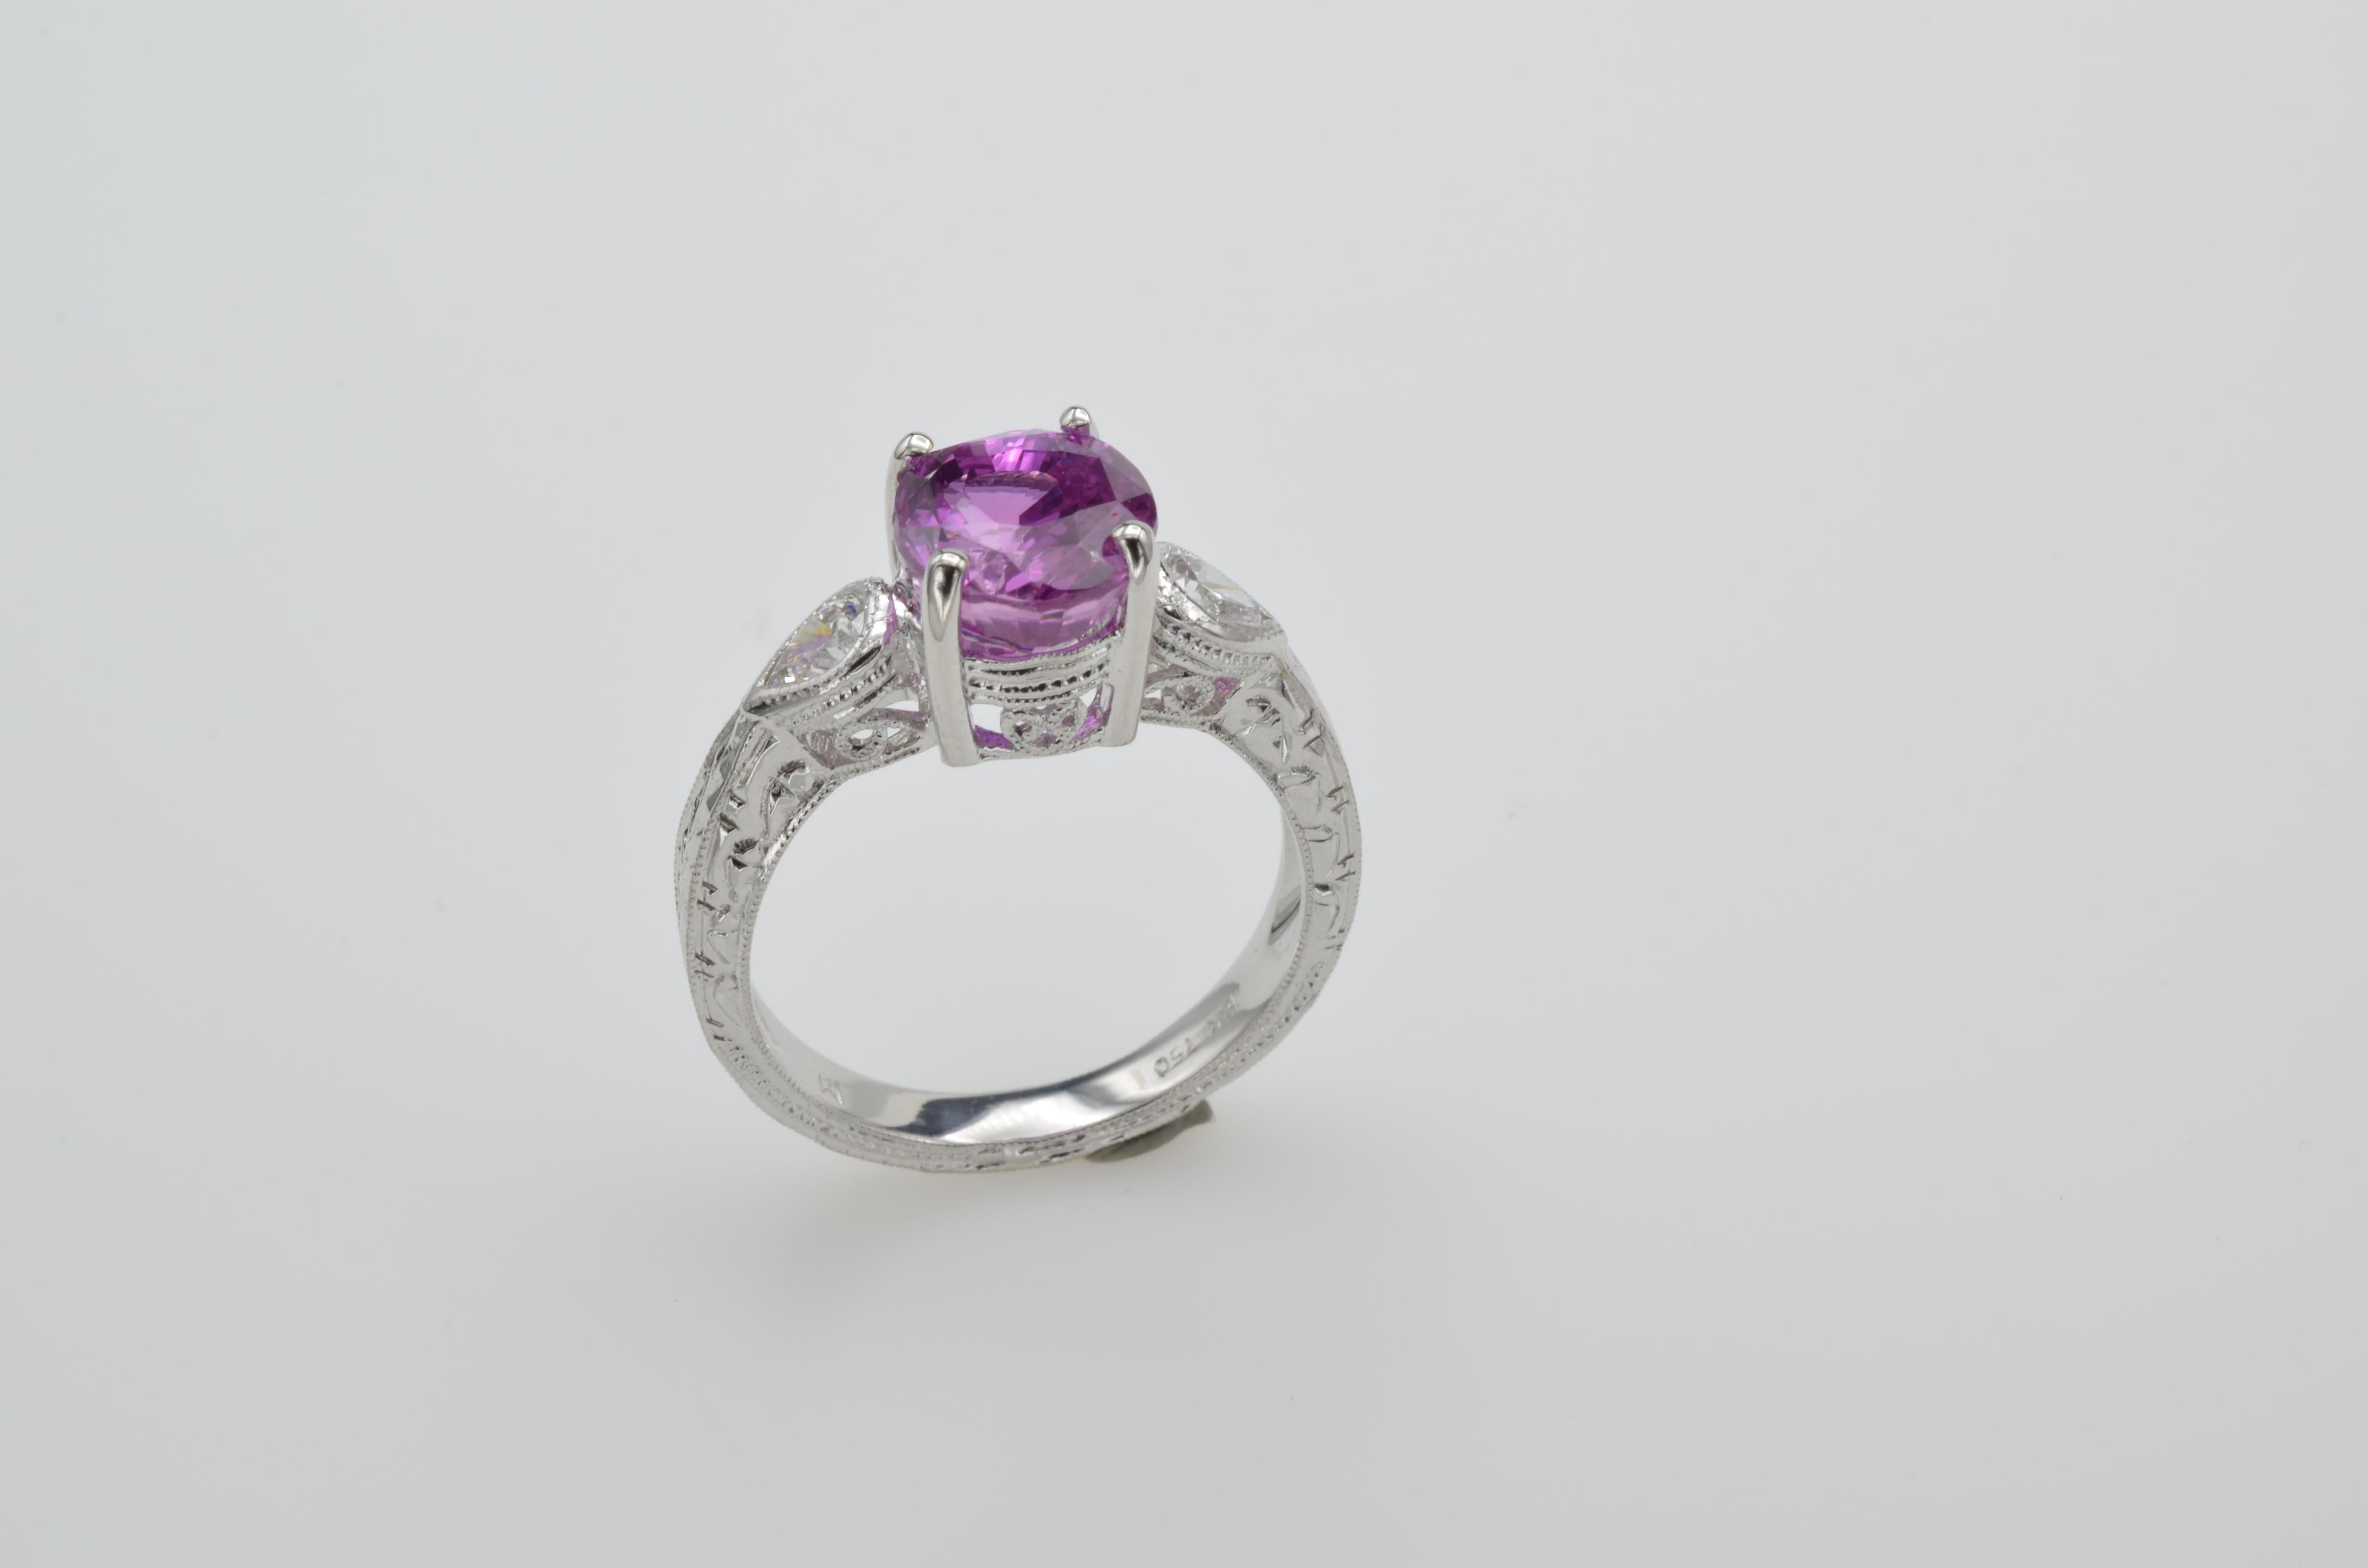 Women's Pink Sapphire Engagement Ring with Pear Diamonds and White Gold Filigree